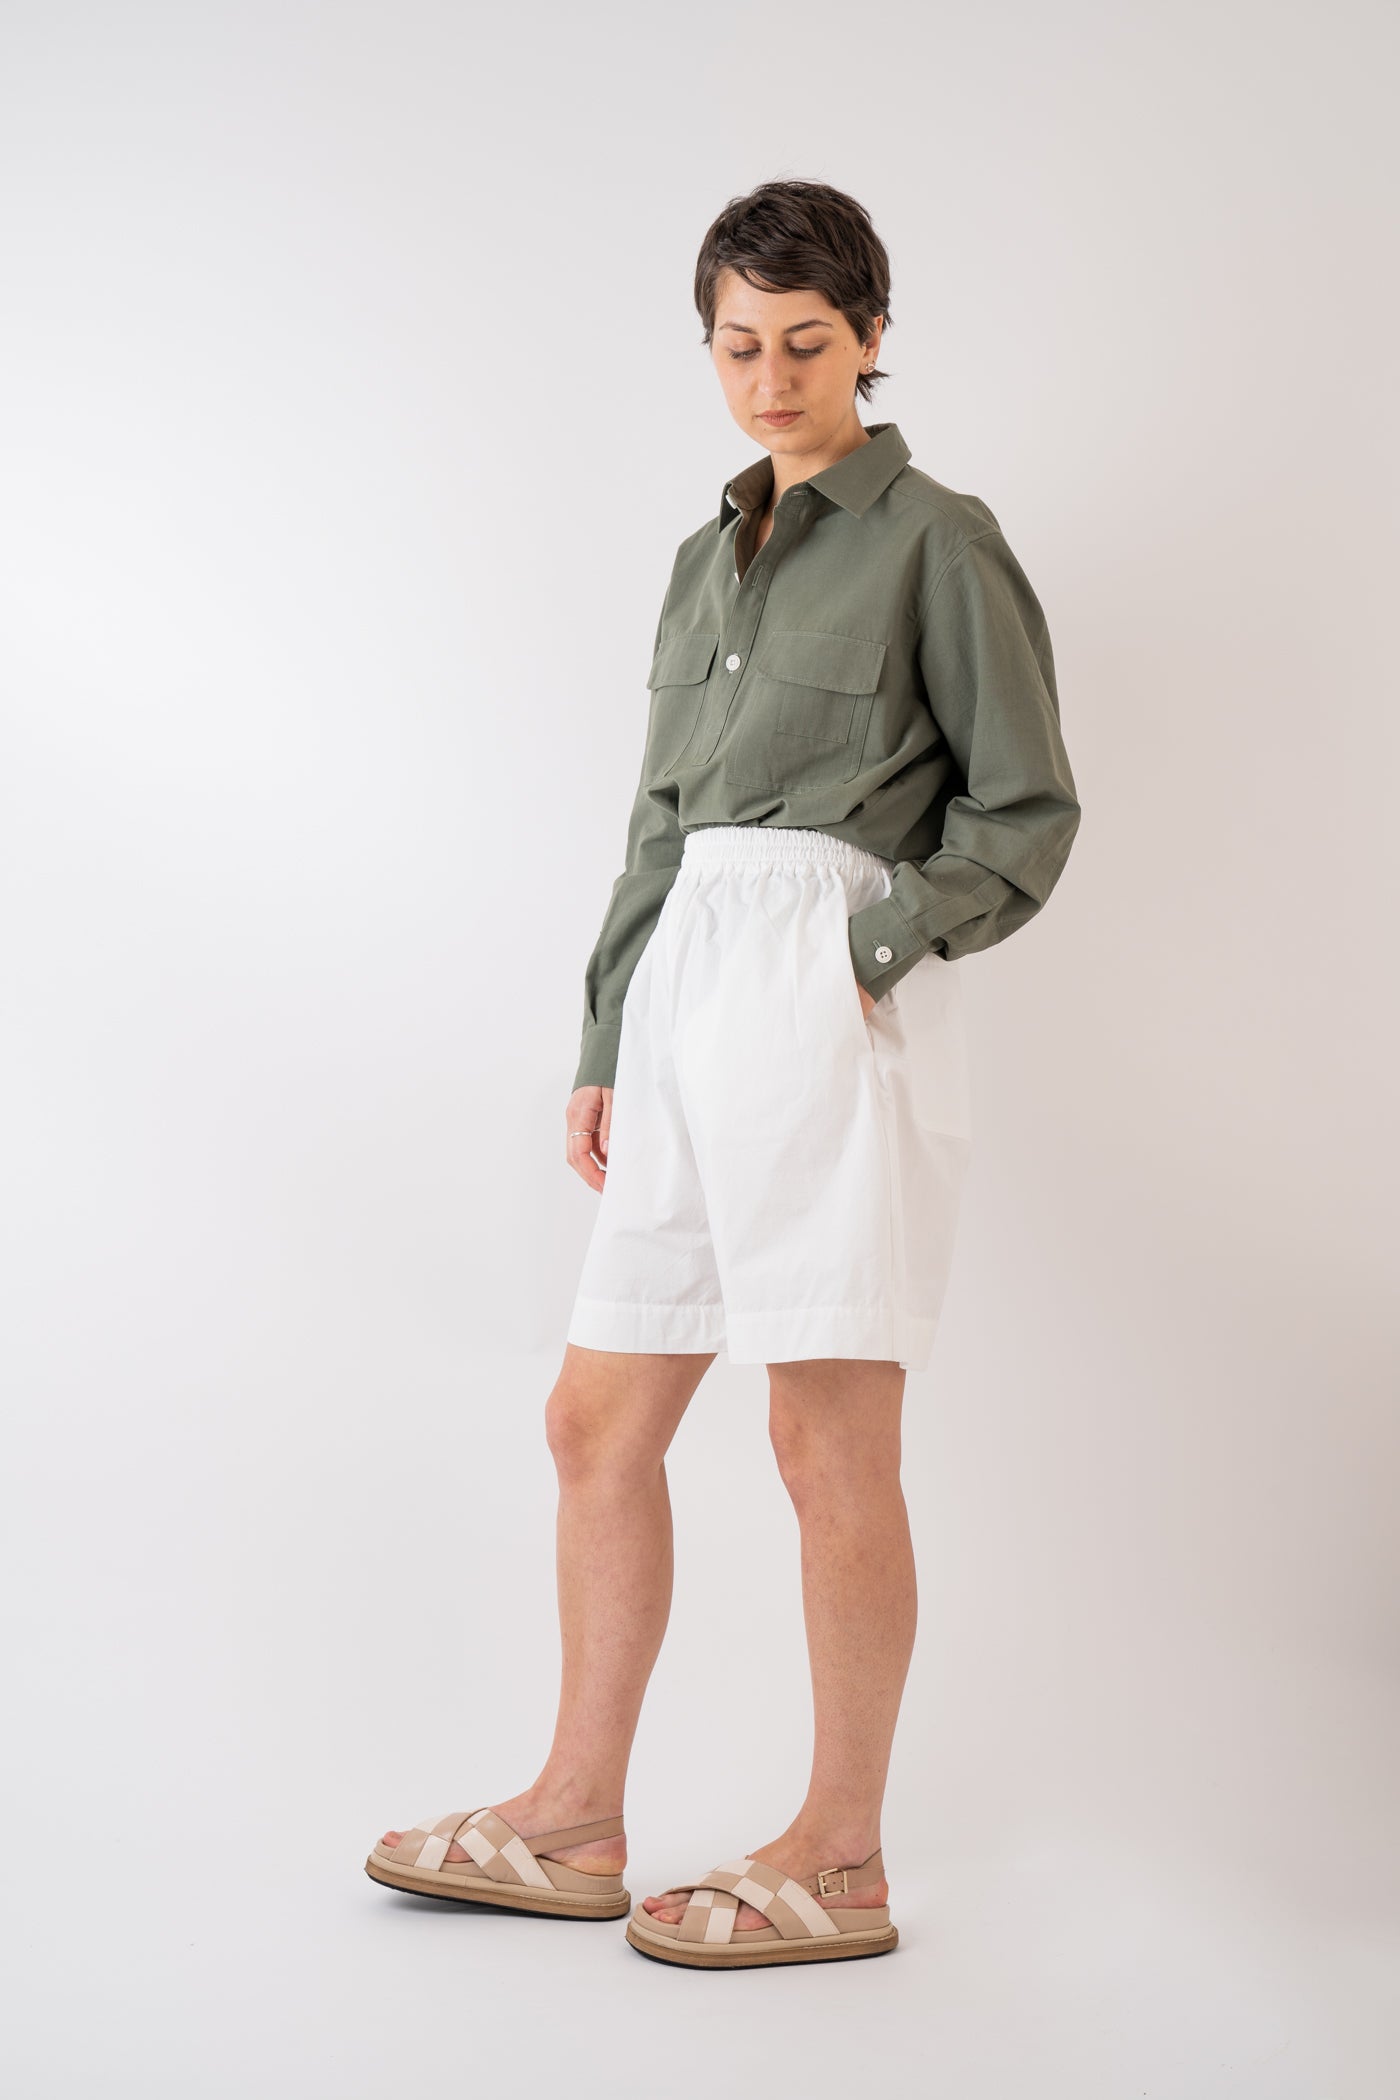 Xi Atelier Organic Cotton Frankie Unisex Shirt in green styled with Cawley Studio Cotton Hilda Short